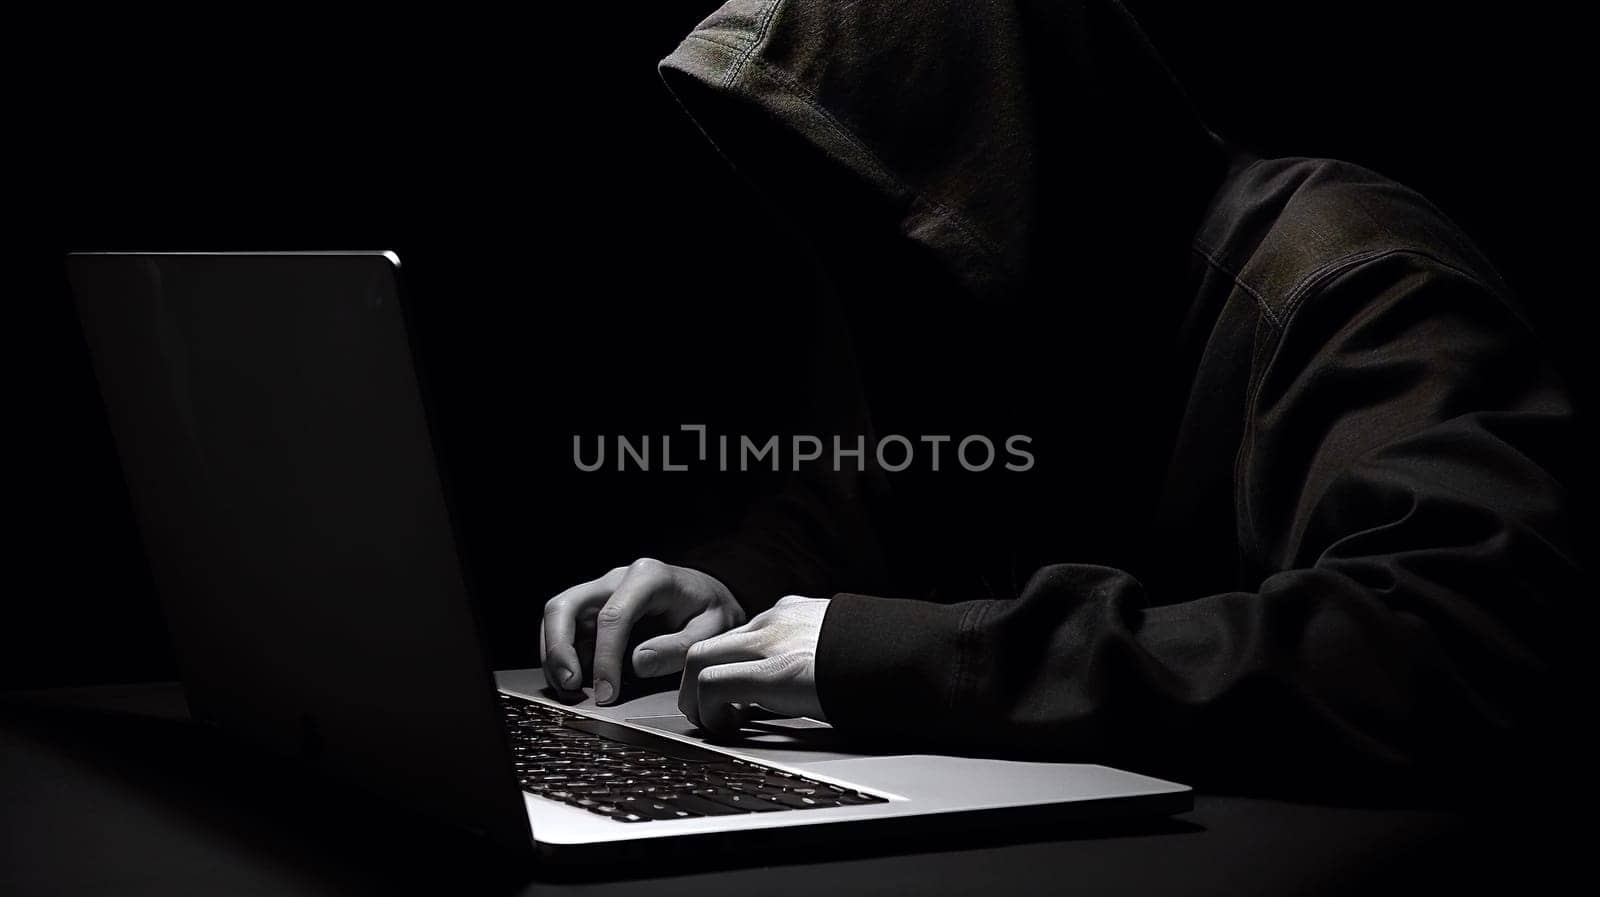 An obscured figure in a hoodie types on a laptop in the dark - cybercrime and online security threats - Generative AI